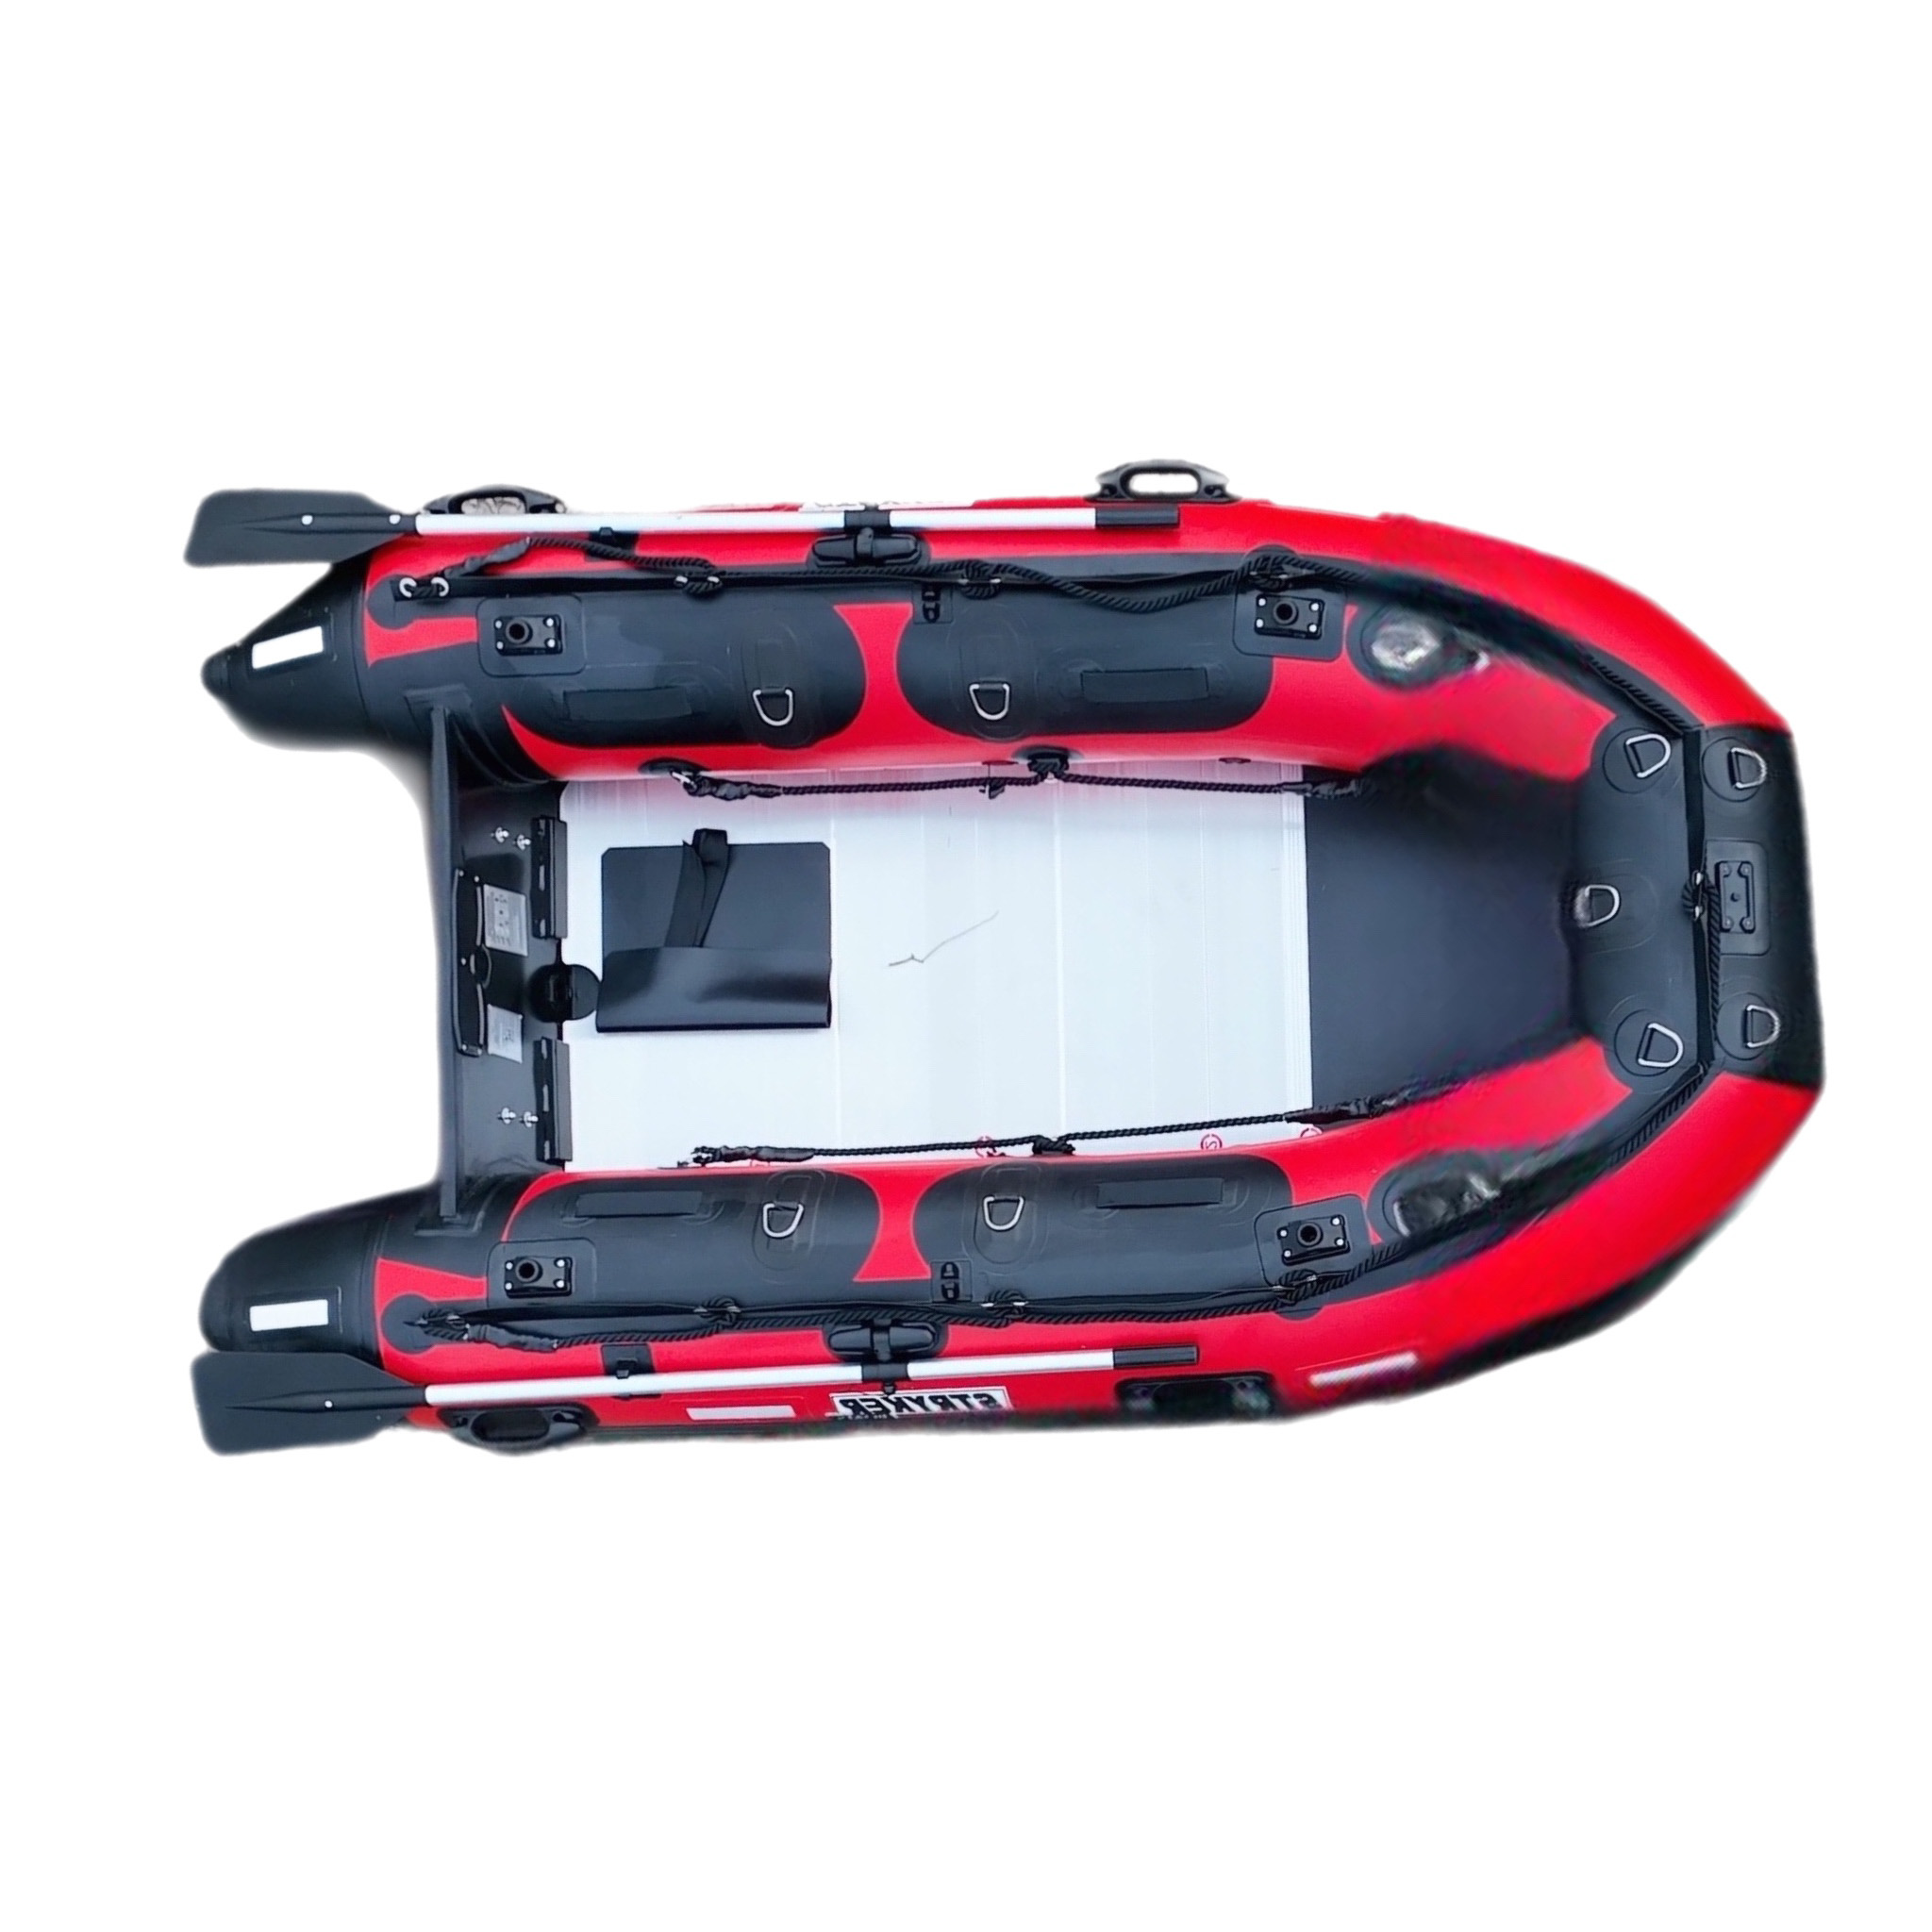 Stryker LX 270 (8’ 9”) Inflatable Boat